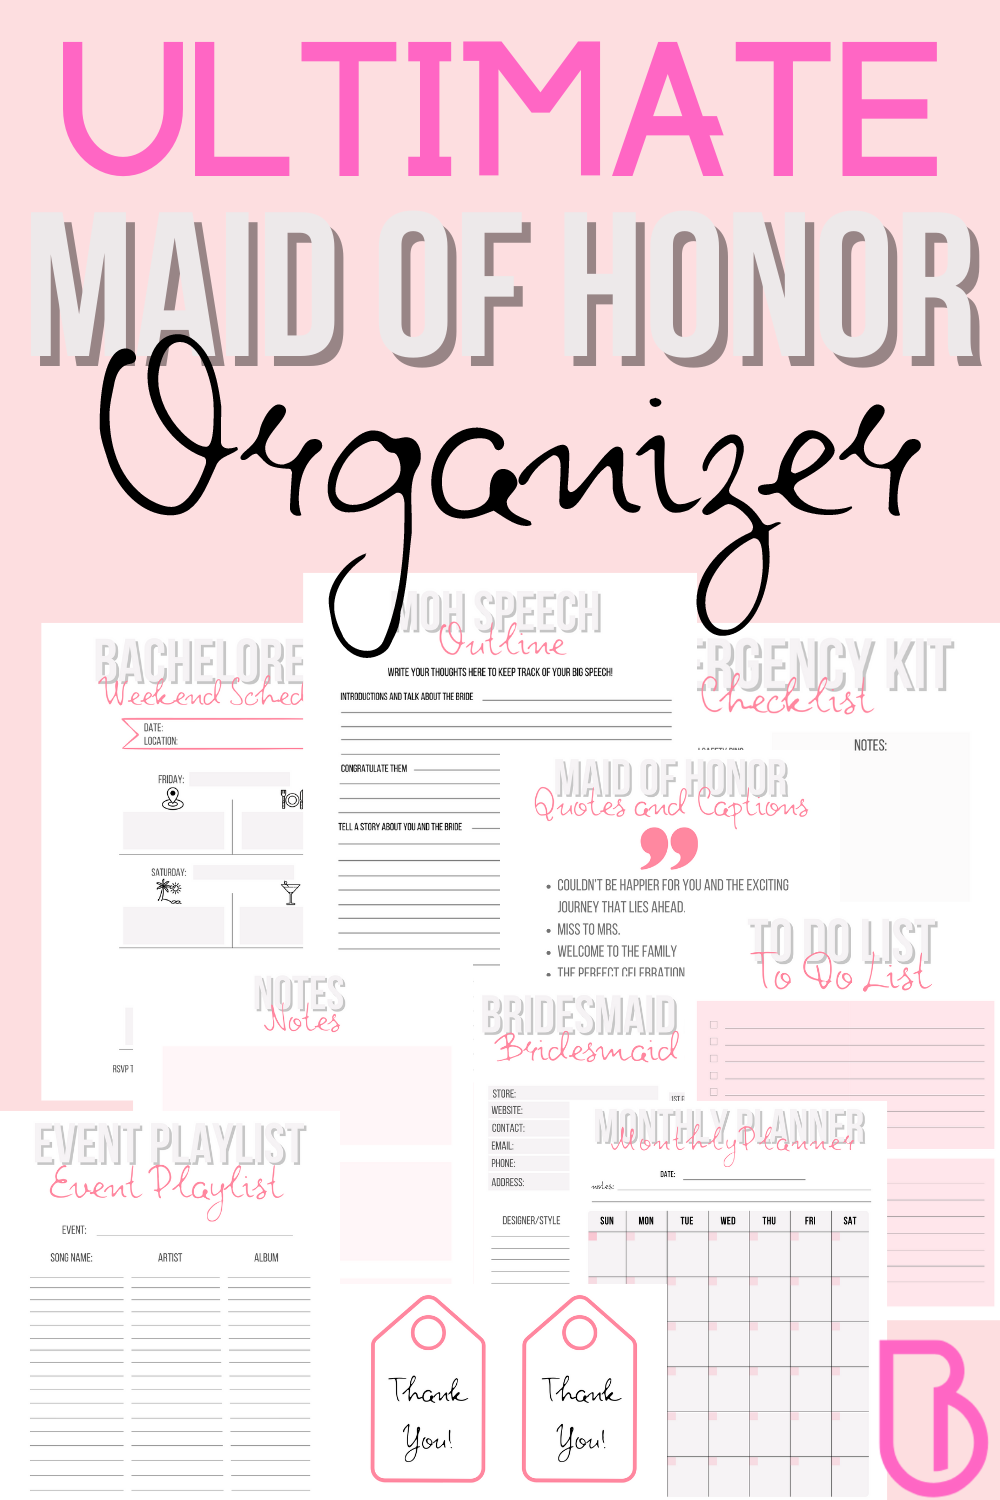 Best Maid Of Honor Planner Out There (Printable and Fillable) Bridal